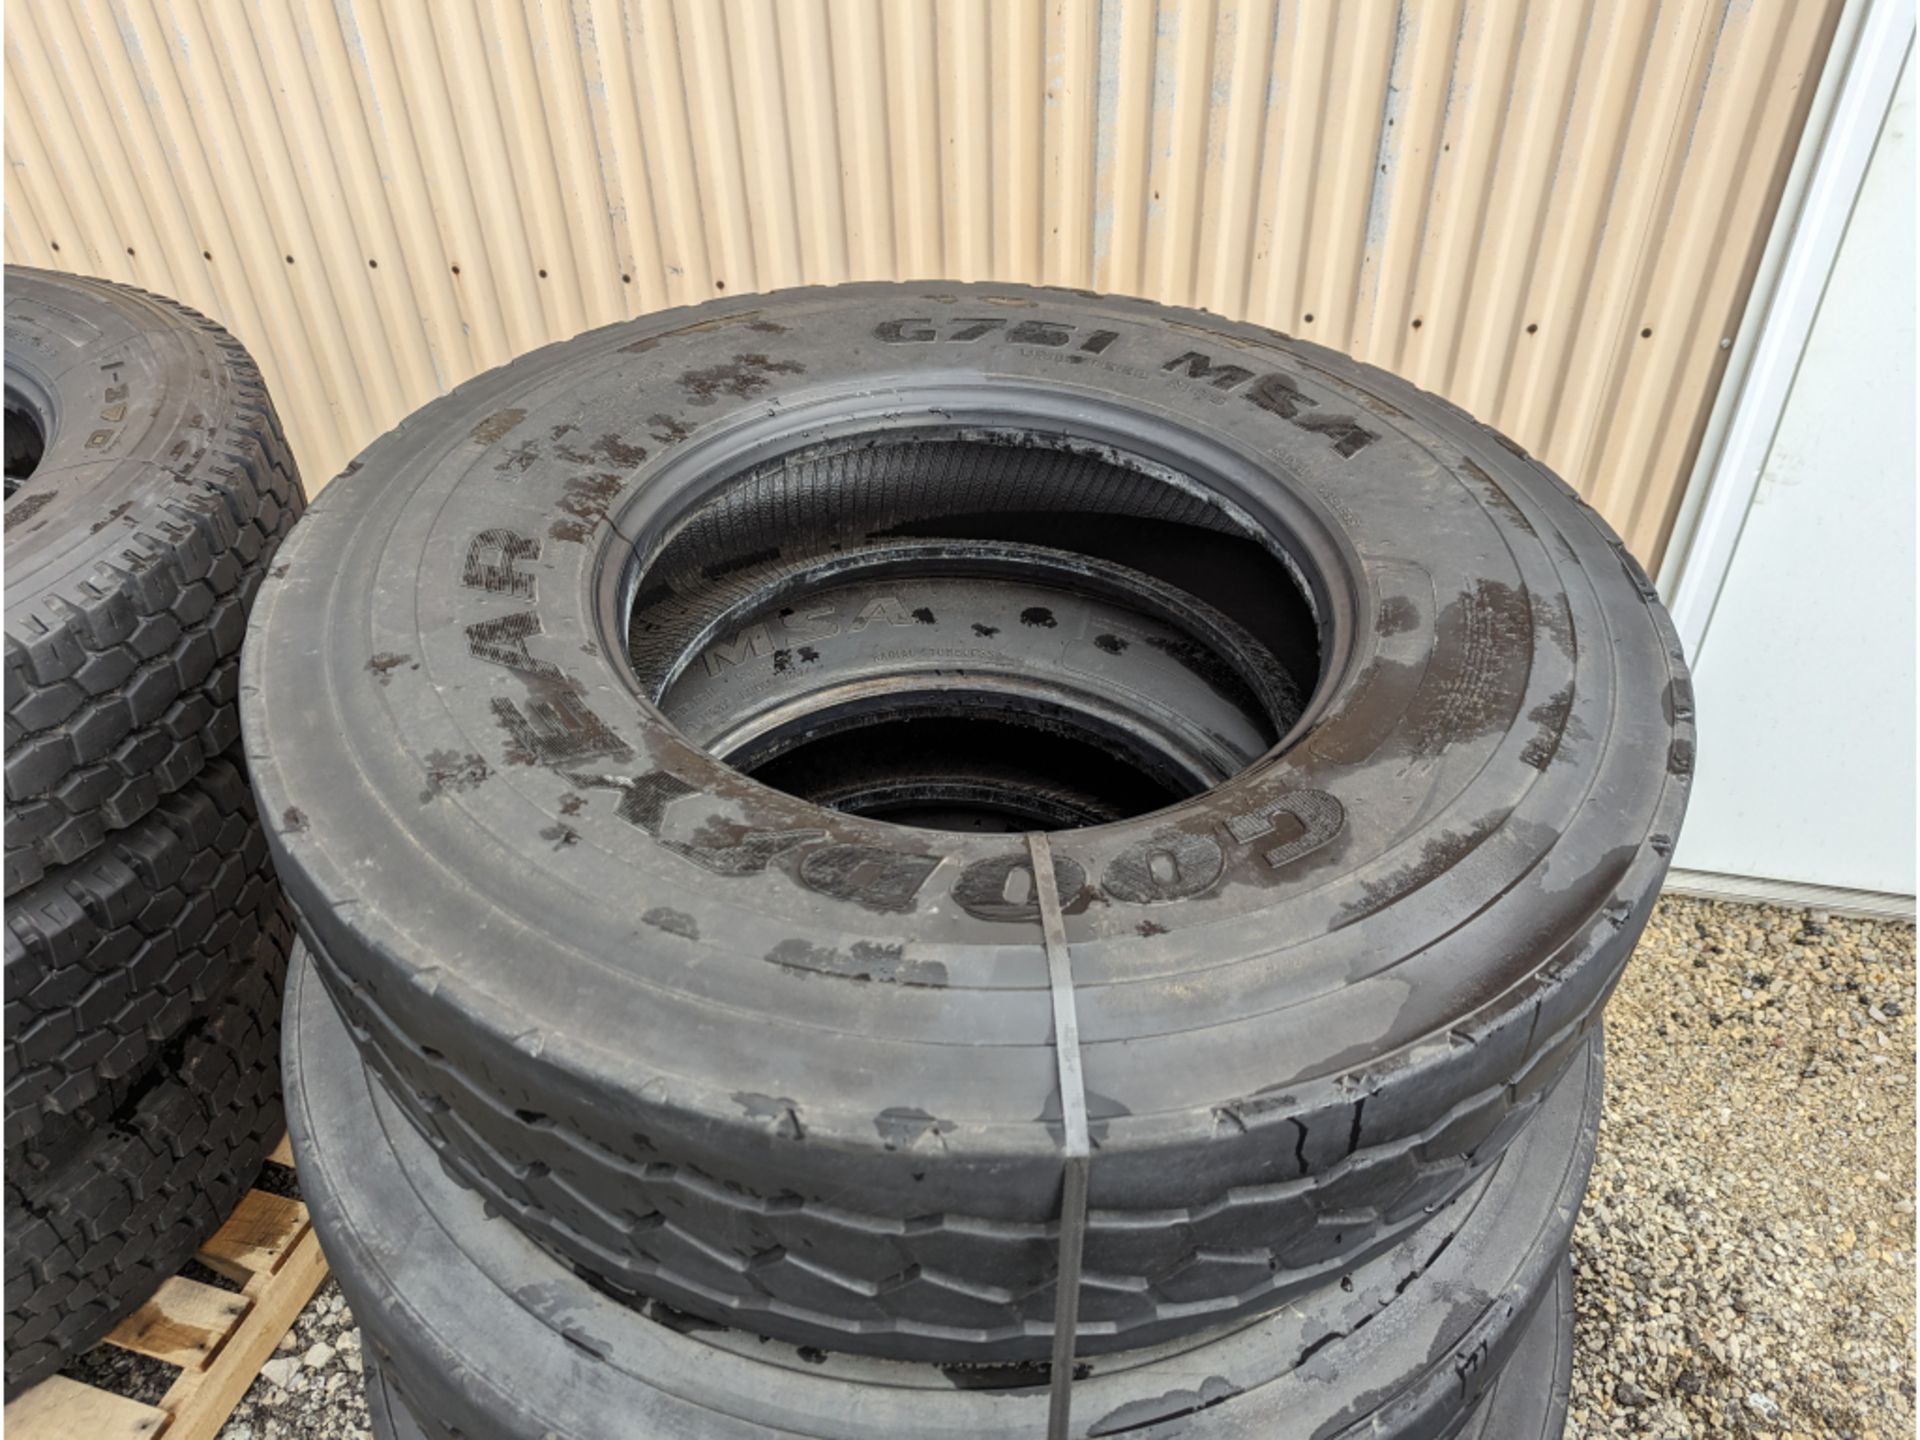 4 Goodyear G751 MSA 12R22.5 commercial truck tires USED Virgin Tread Surplus Take Off - Image 3 of 5